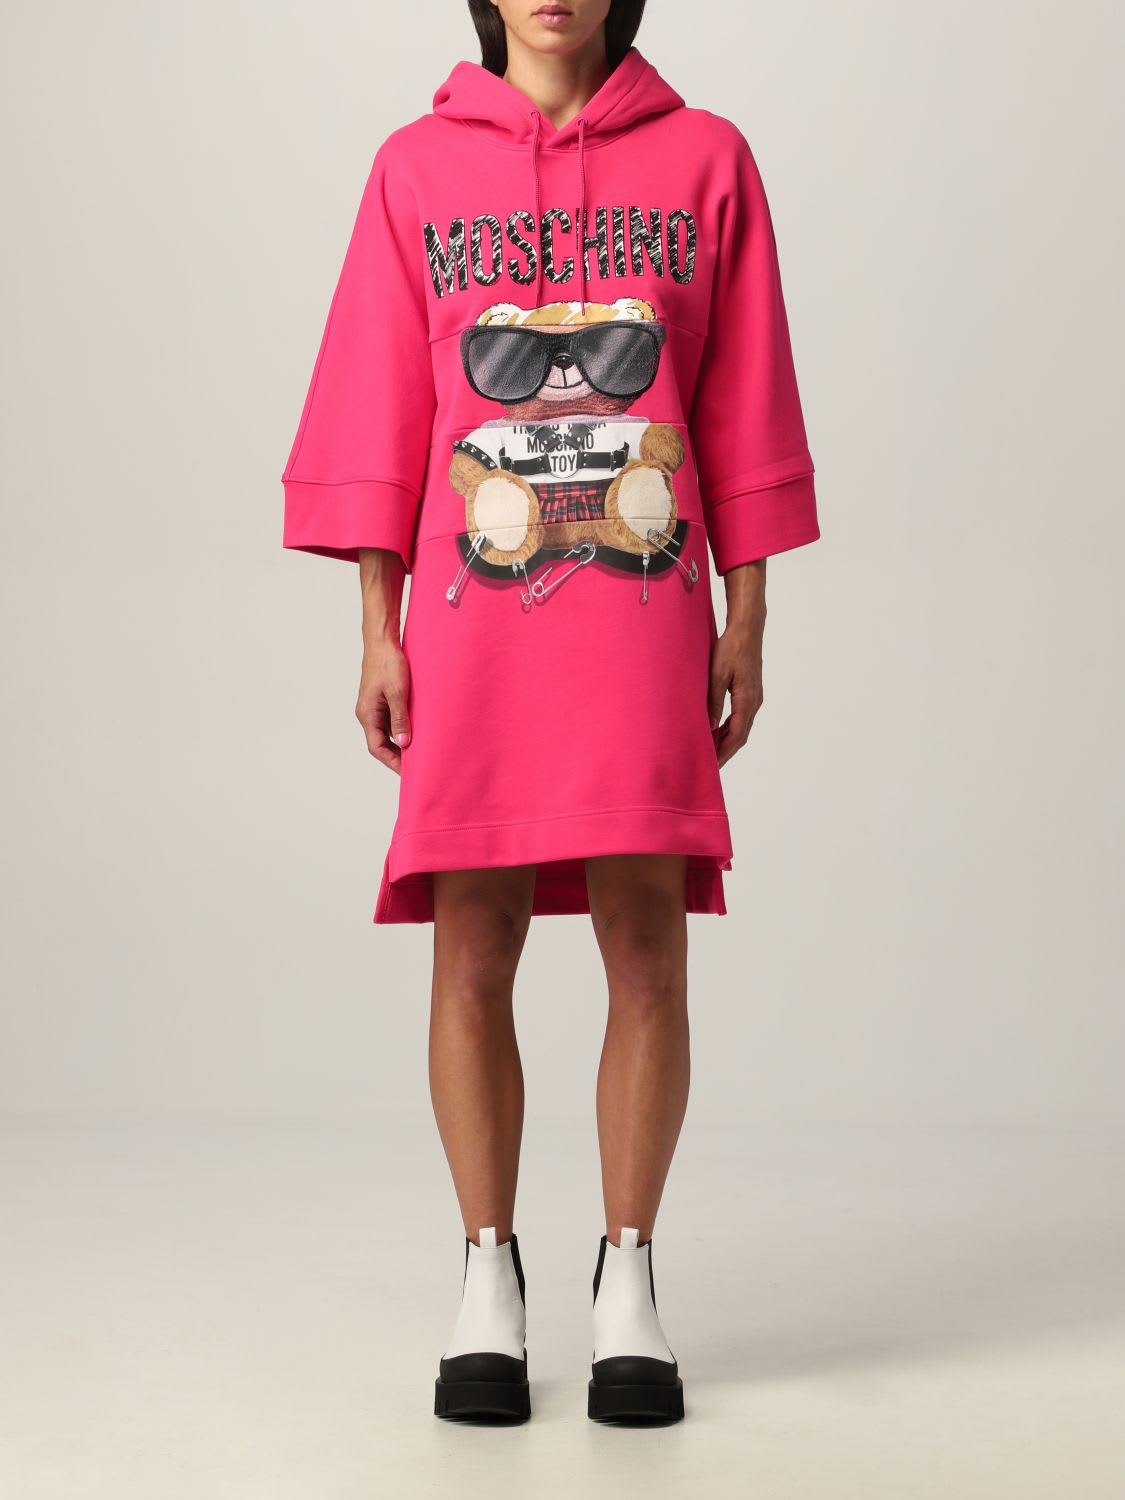 Moschino Couture Dress Moschino Couture Cotton Sweatshirt Dress With Teddy